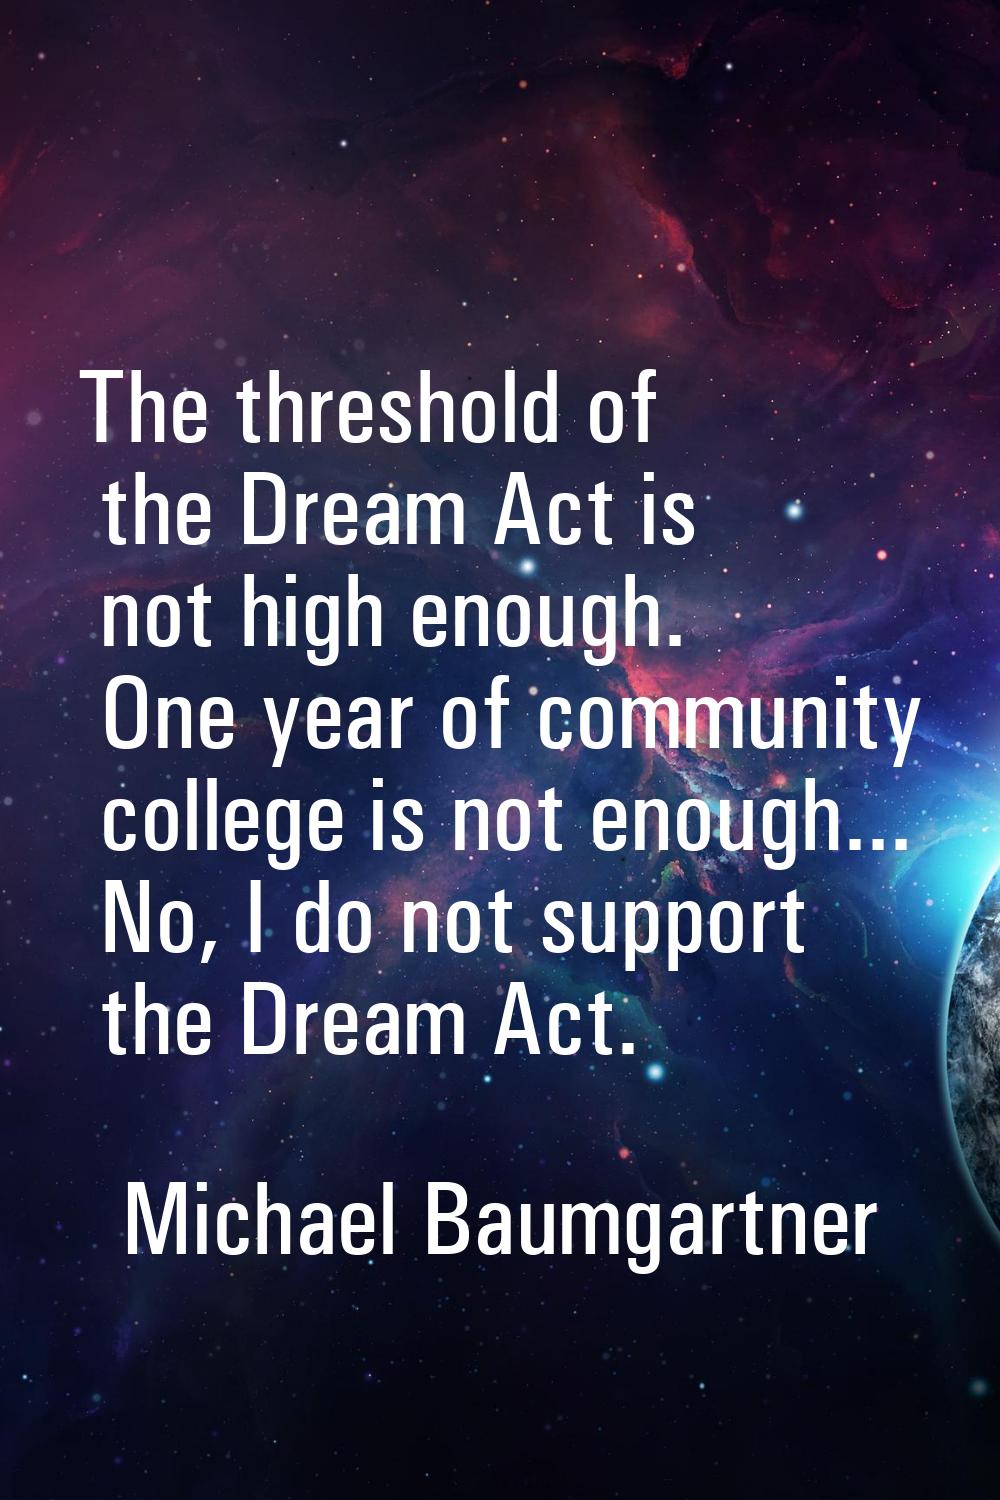 The threshold of the Dream Act is not high enough. One year of community college is not enough... N